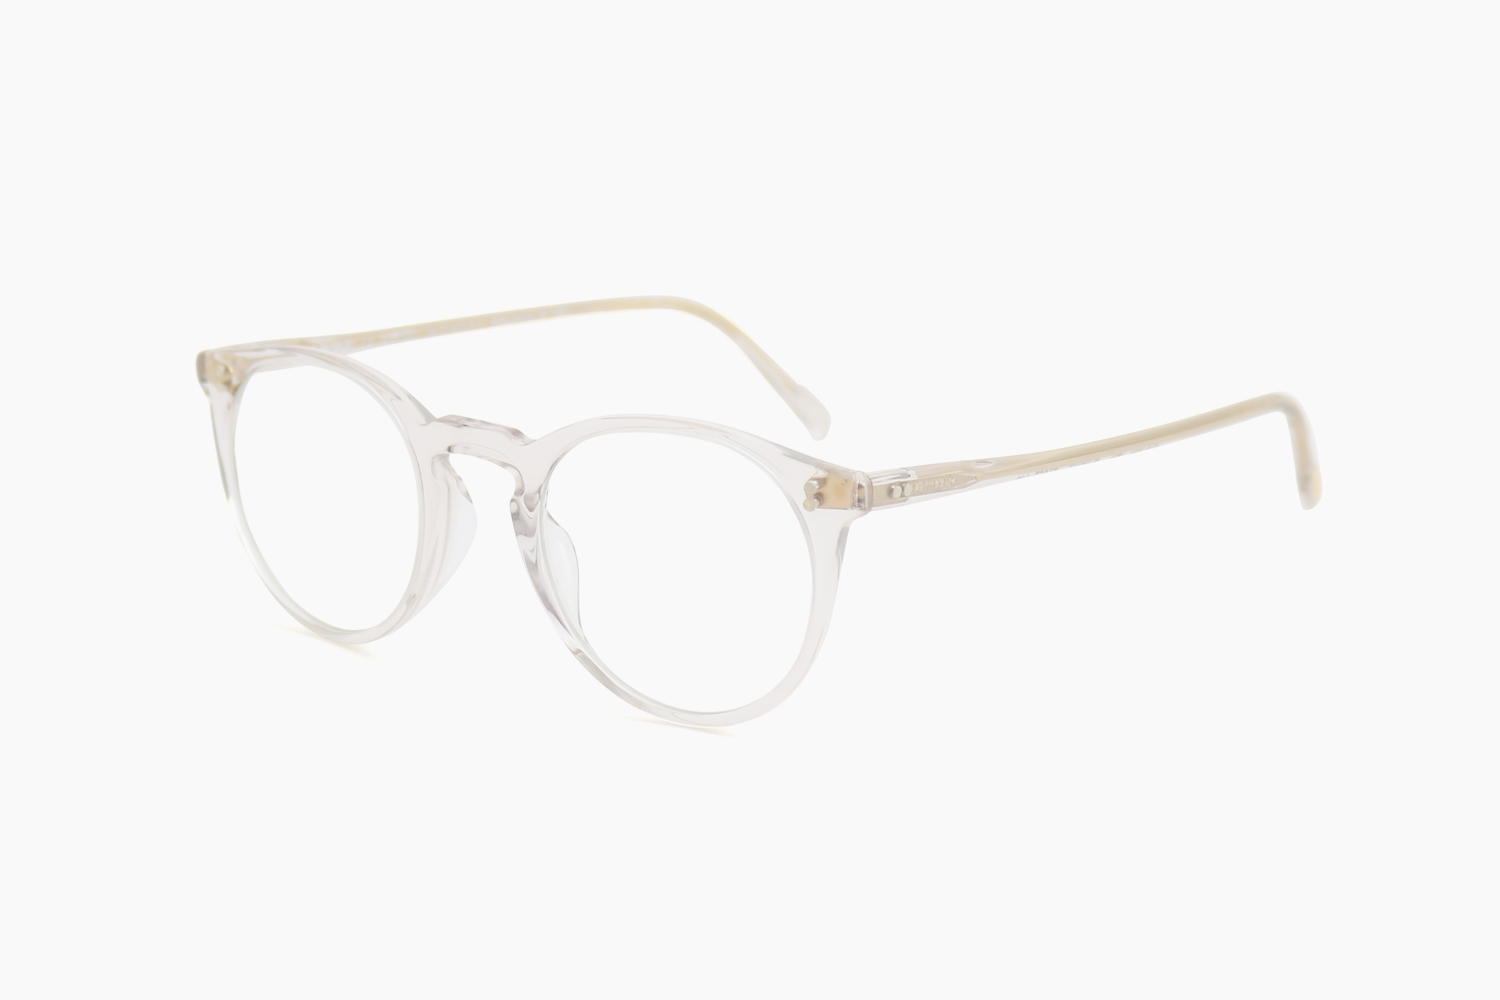 O’MALLEY - 1467 CLEAR｜OLIVER PEOPLES